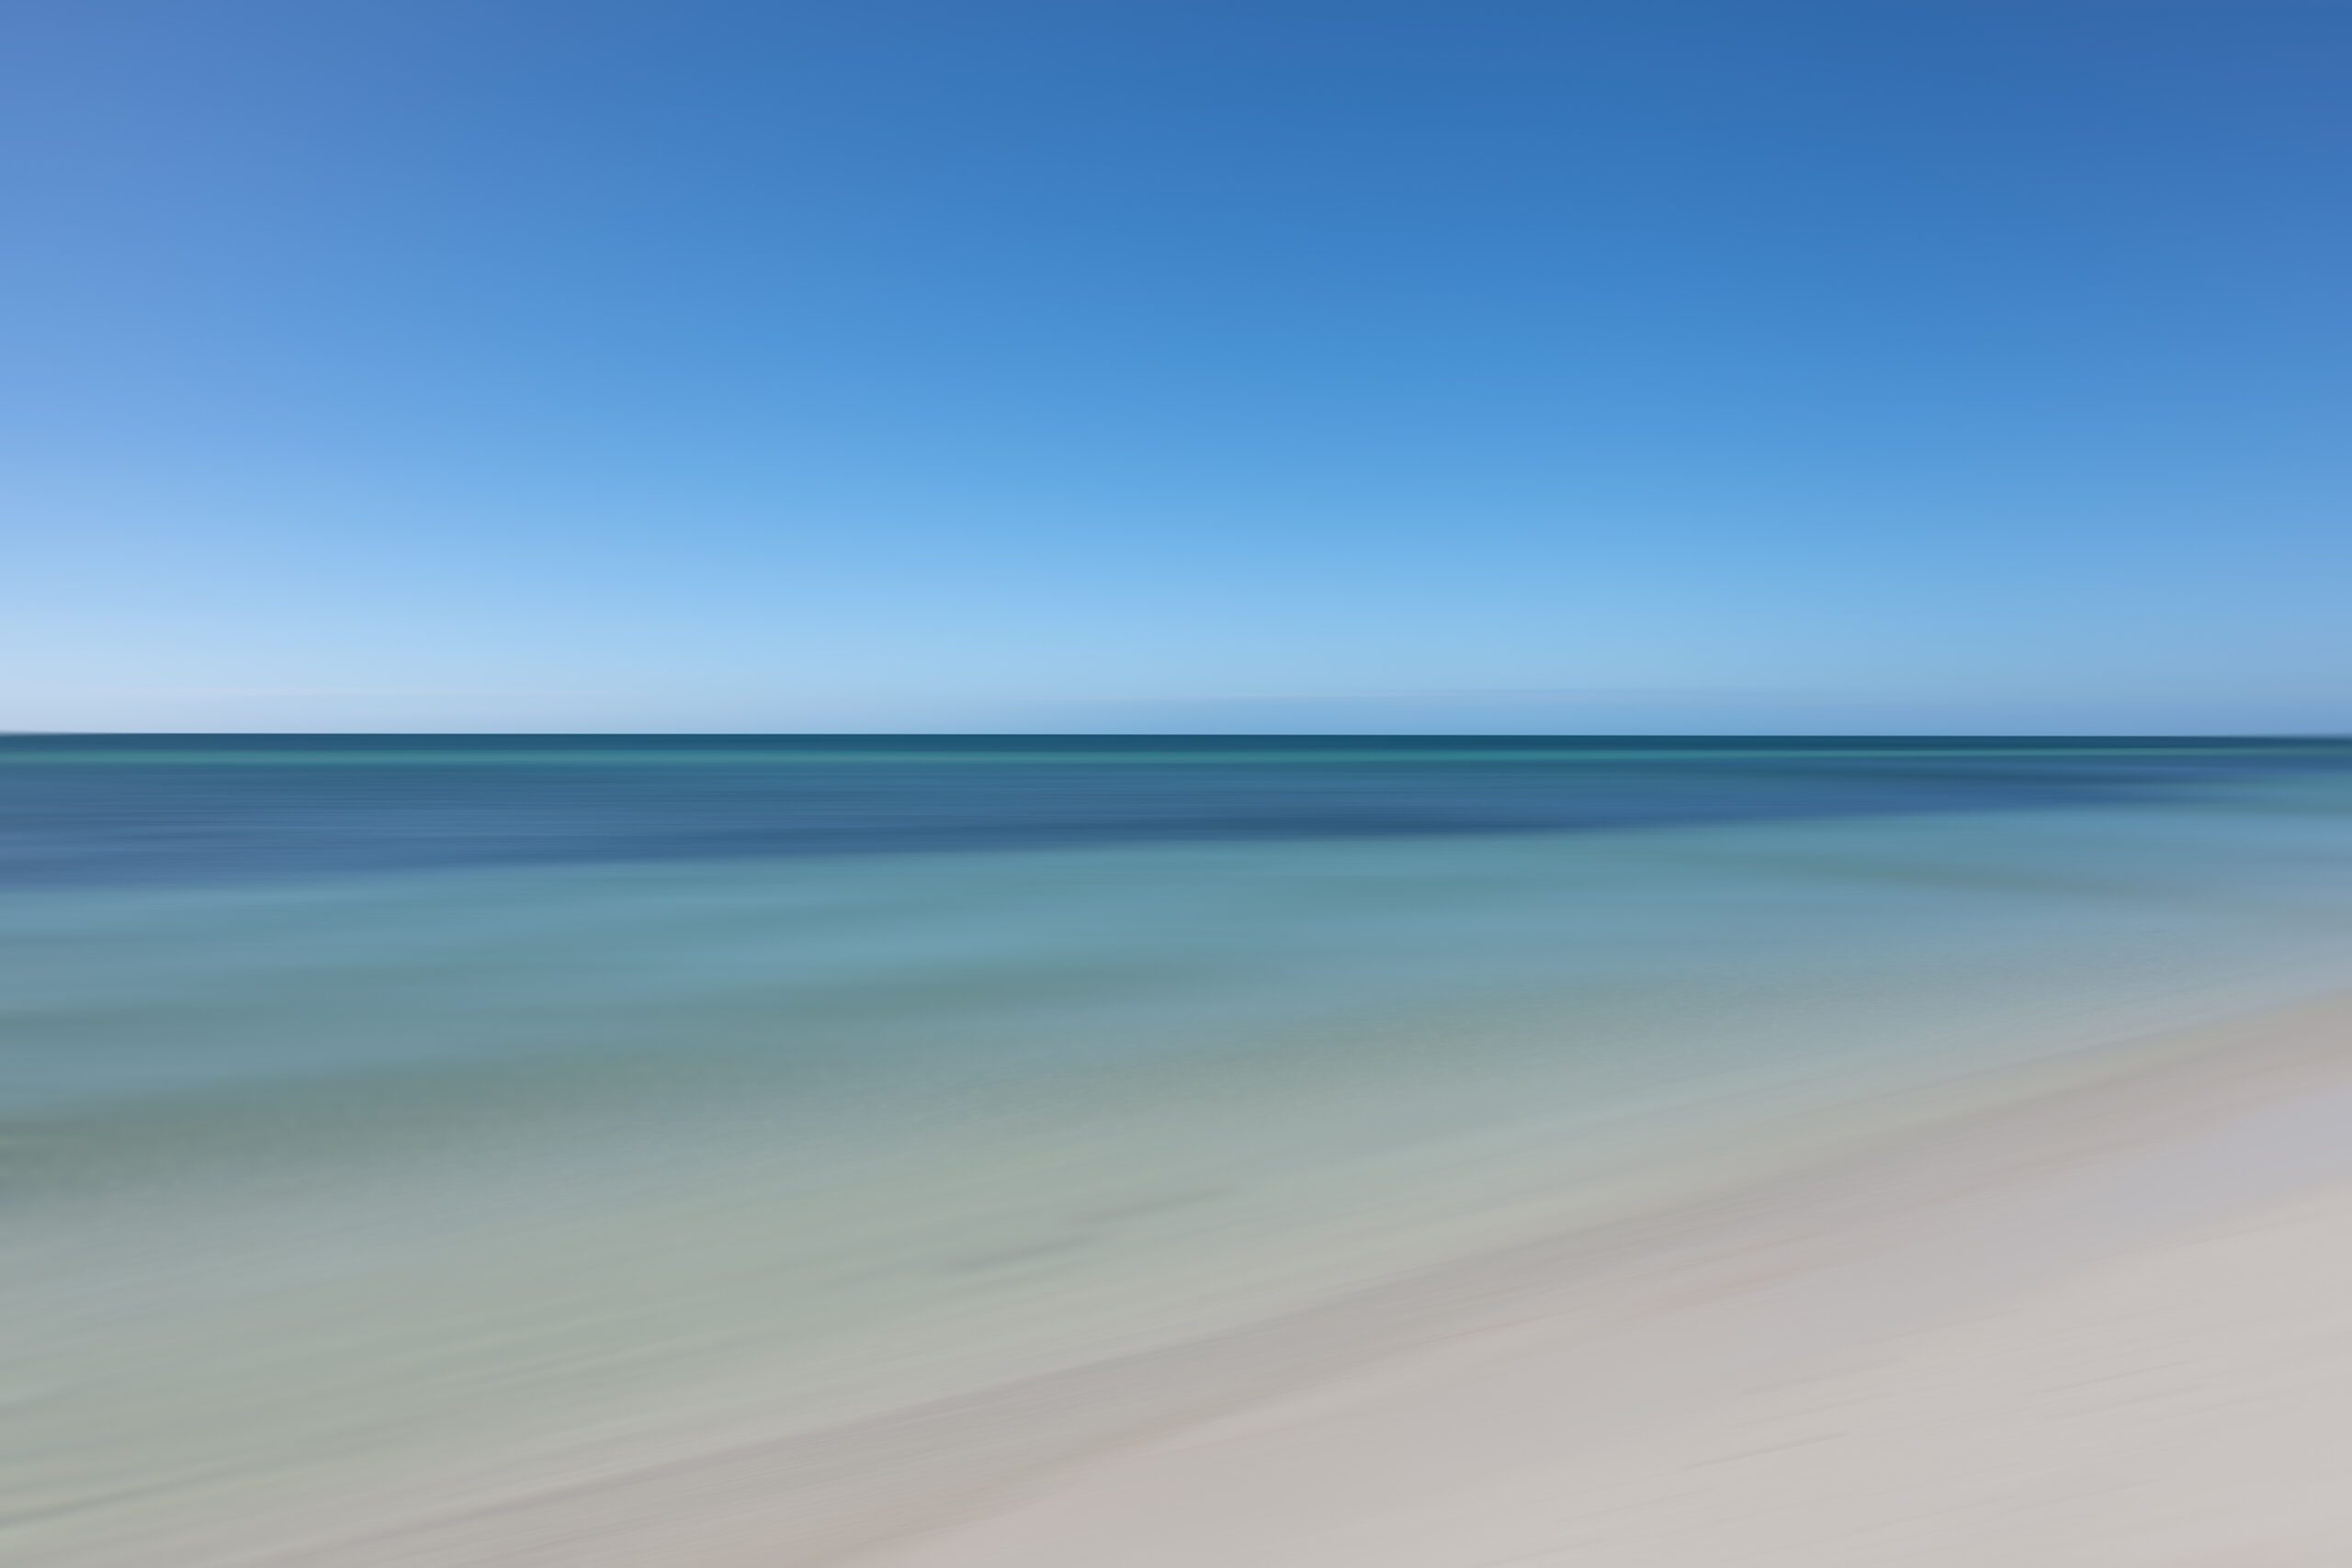 Witness the Atlantic Ocean at its calmest during midday at Bahia Honda State Park, captured to perfection in this elegant and minimalistic artwork.